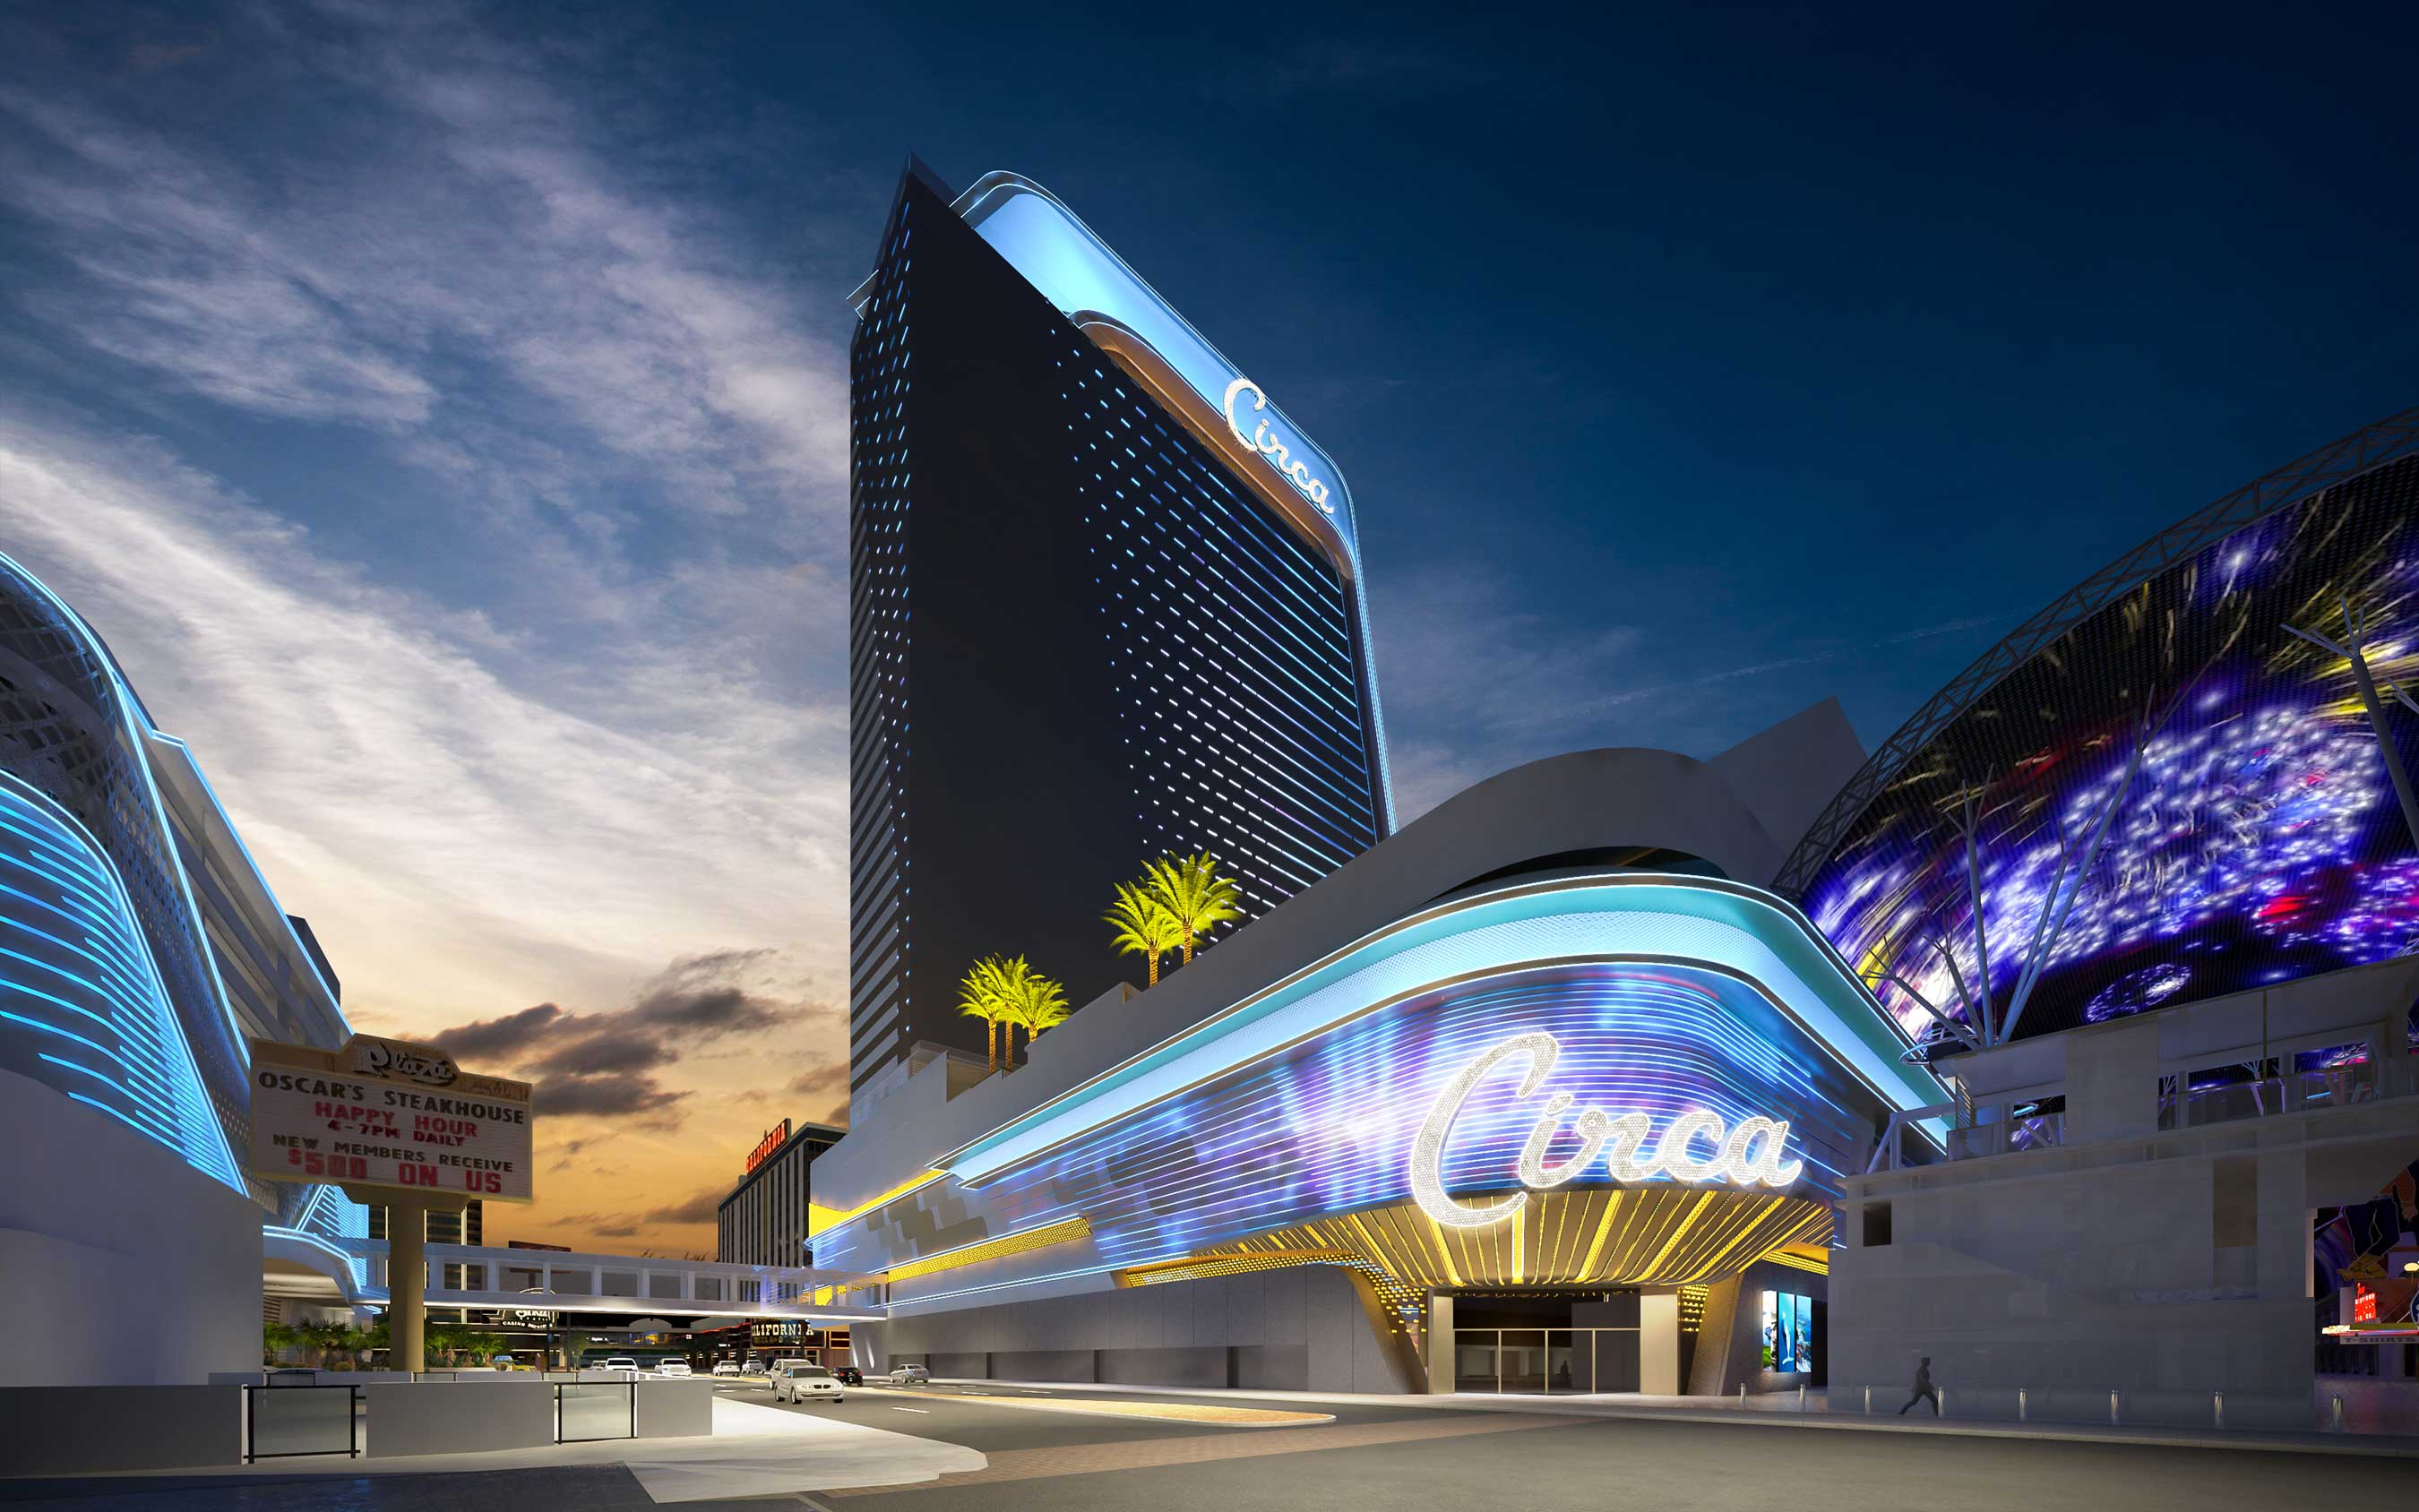 Circa Resort & Casino will bring a new energy to Downtown Las Vegas as its first ground-up casino resort development since 1980.